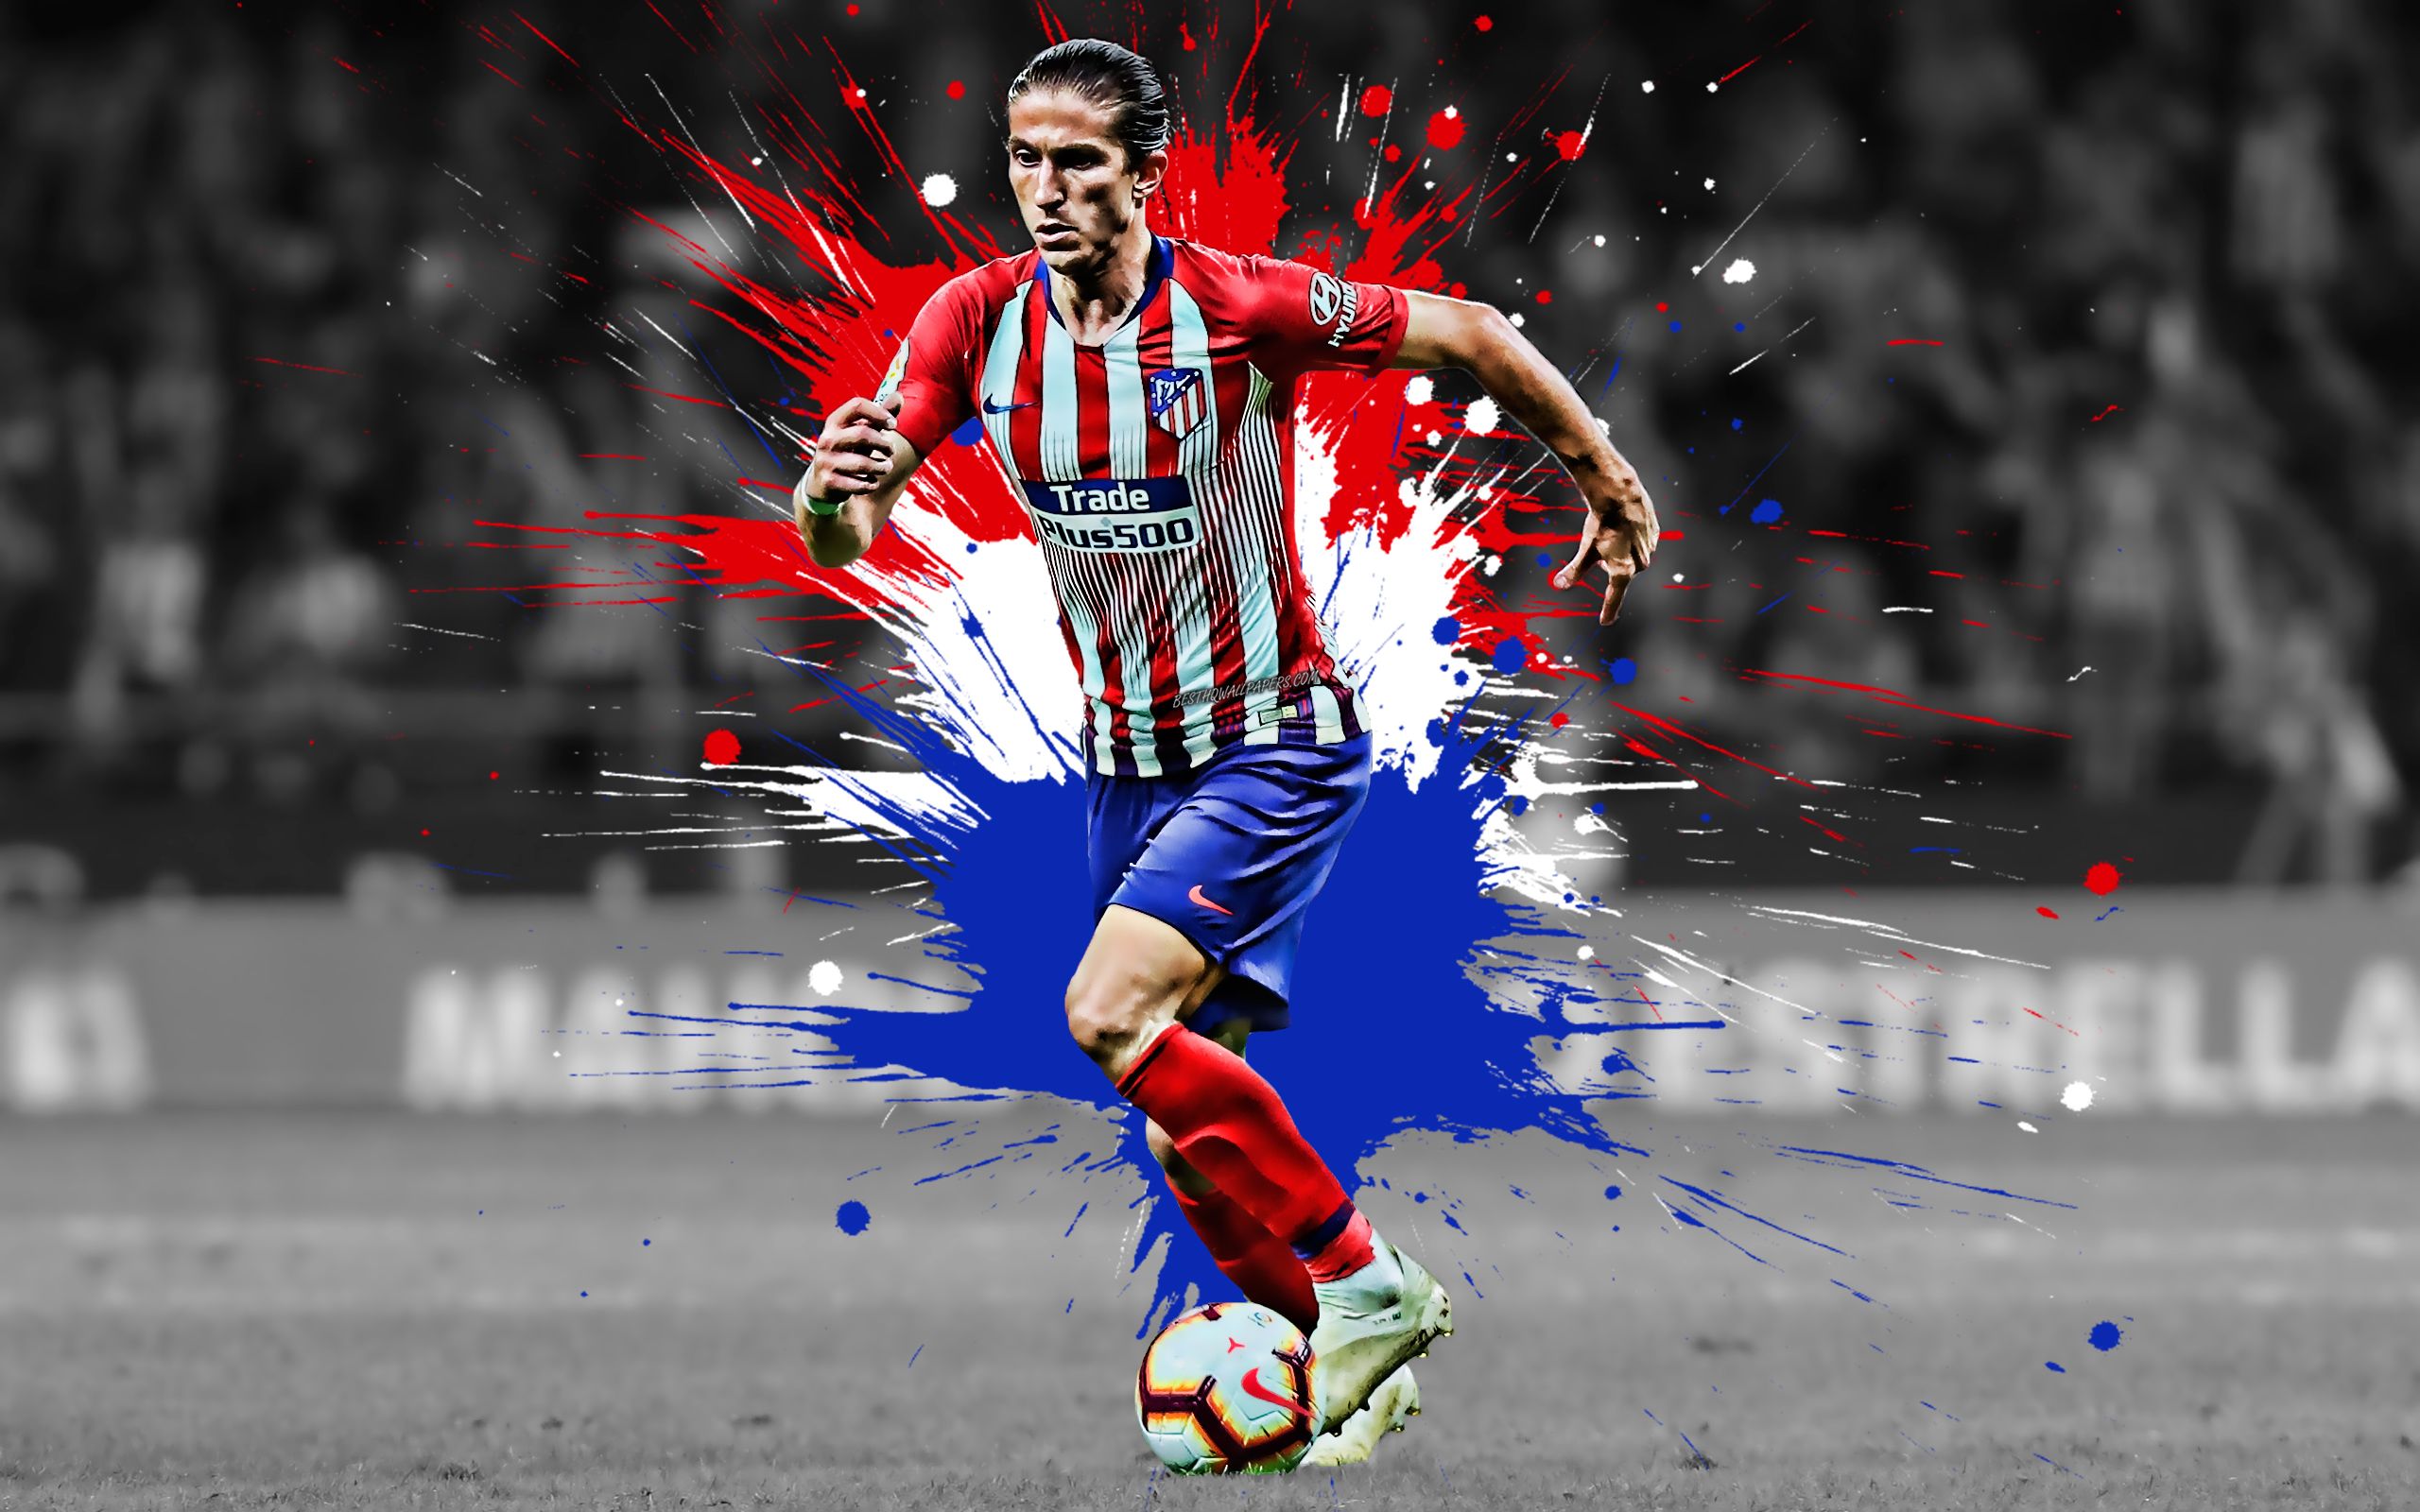 Download wallpaper Filipe Luis, 4k, Brazilian football player, Atletico Madrid, defender, red blue white paint splashes, creative art, La Liga, Spain, football, grunge for desktop with resolution 2560x1600. High Quality HD picture